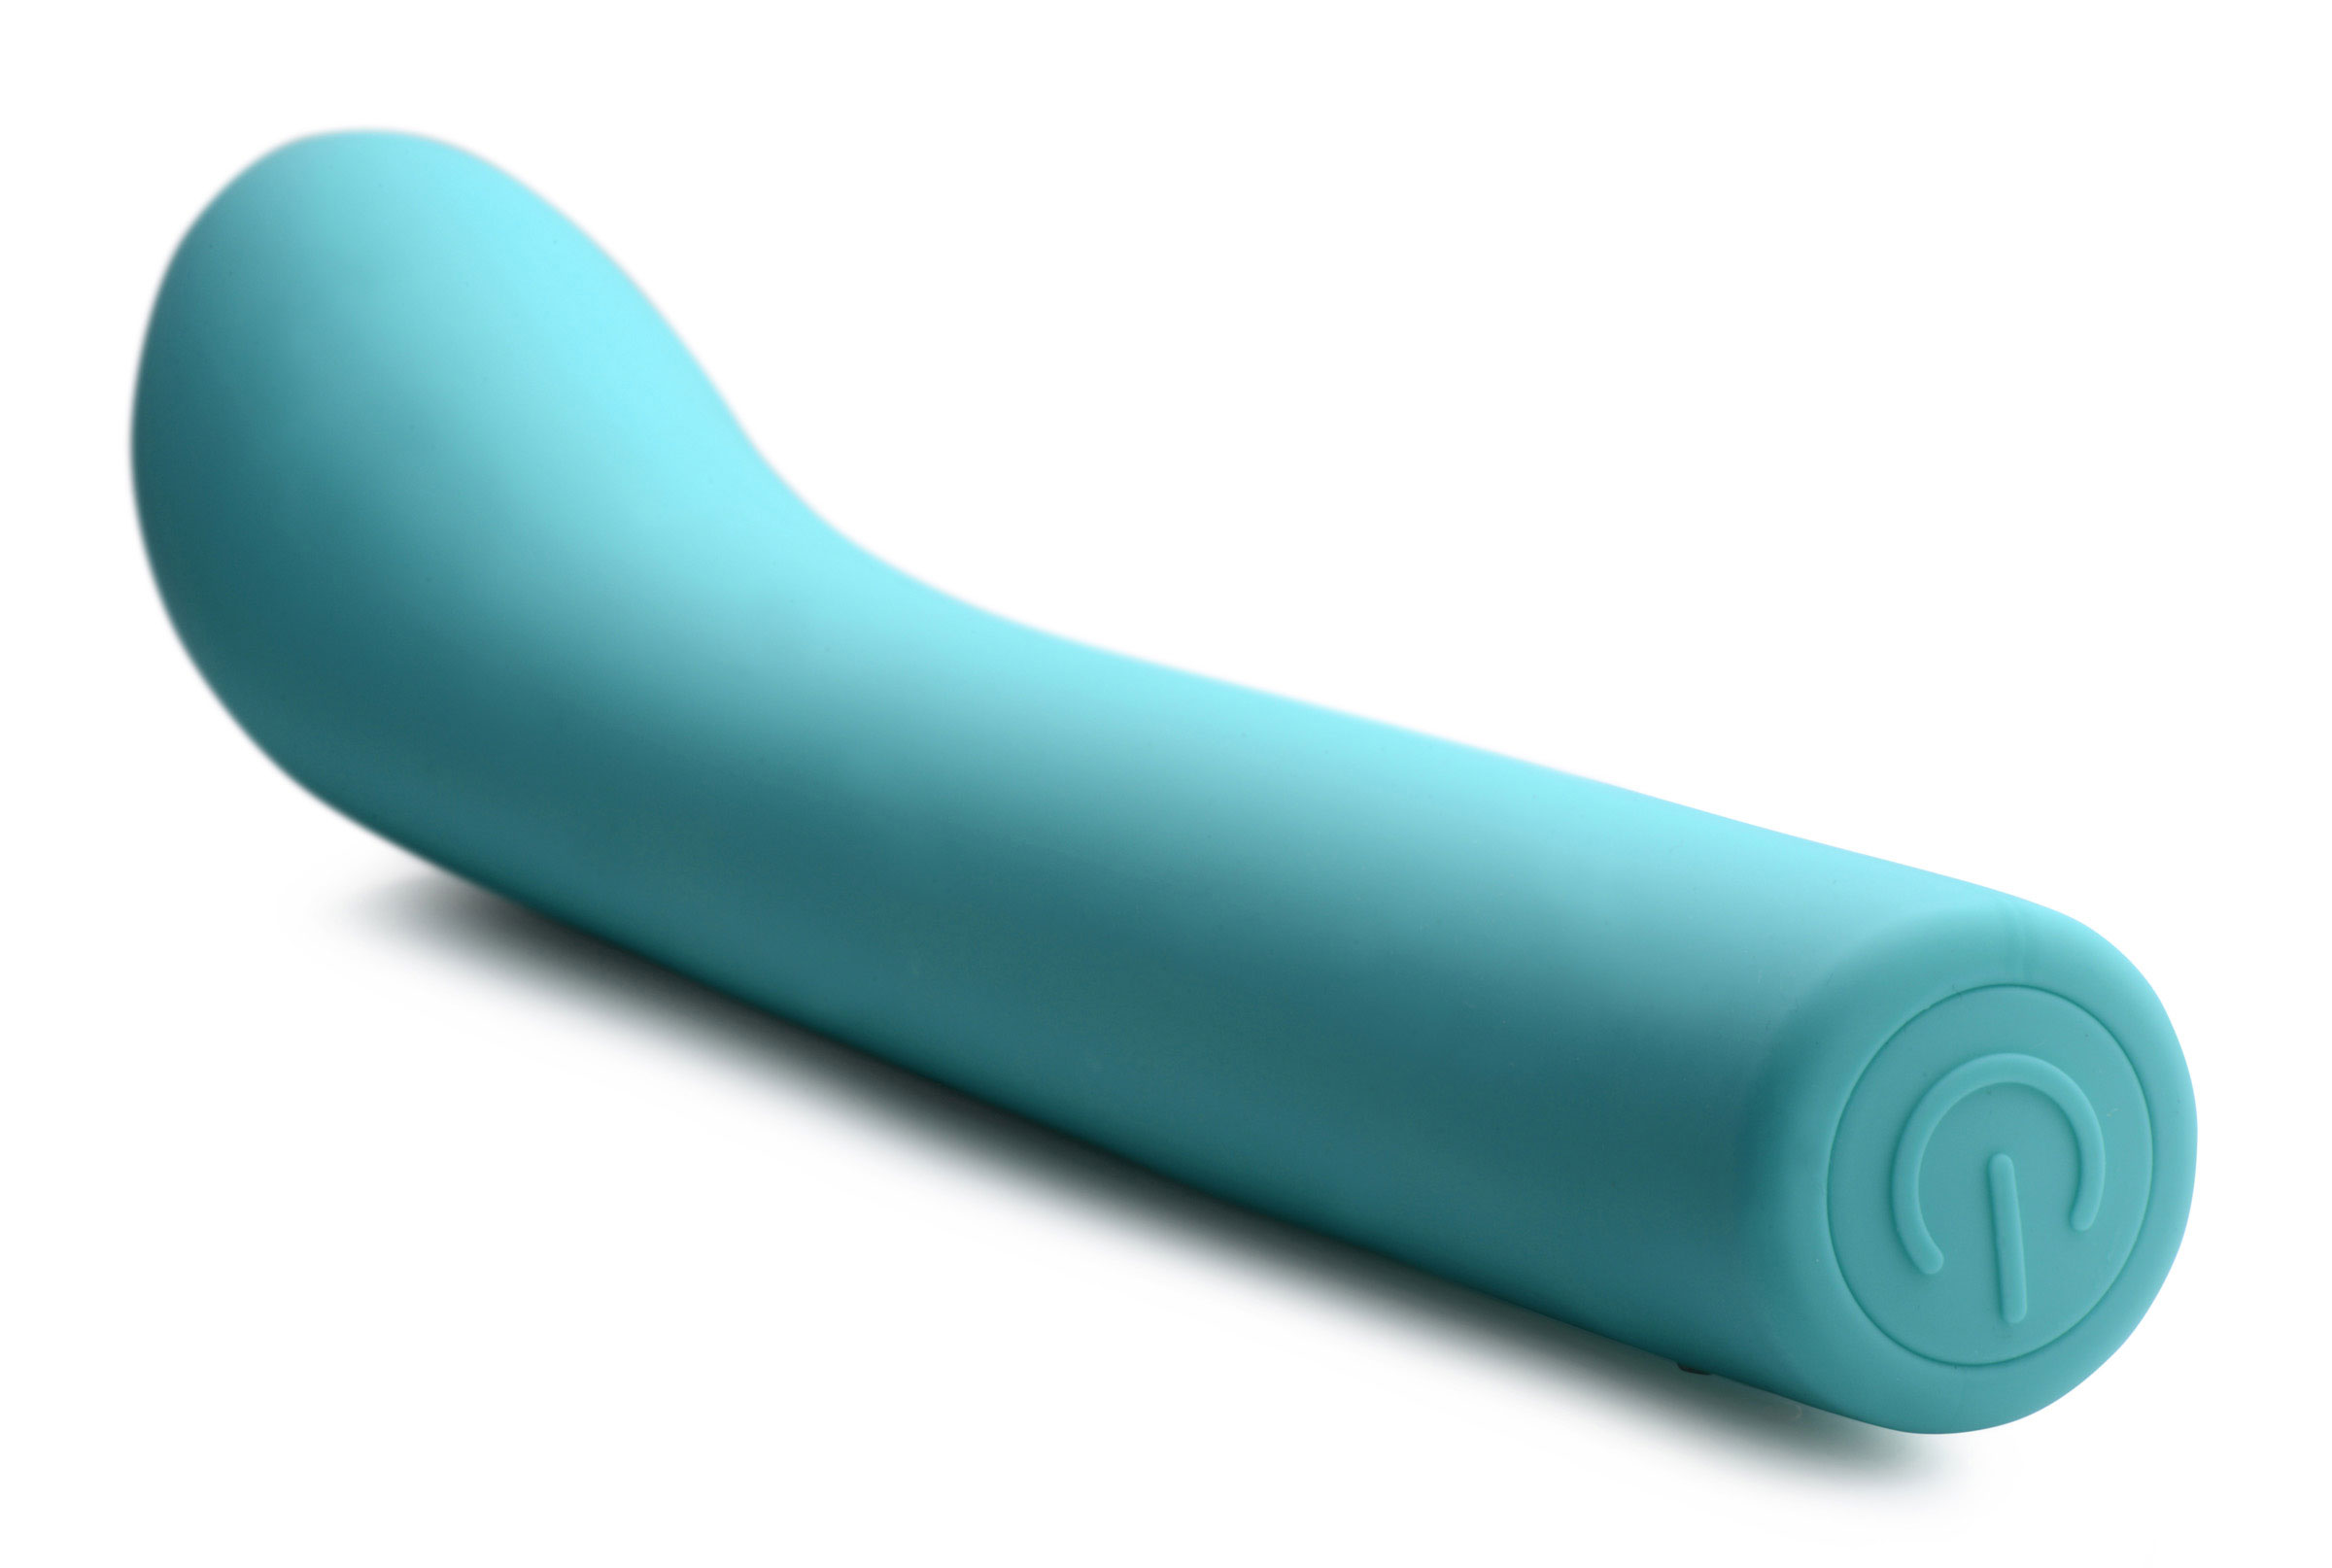 Inm Ag683teal 5 Star 9x Come Hither G Spot Silicone Vibrator Teal